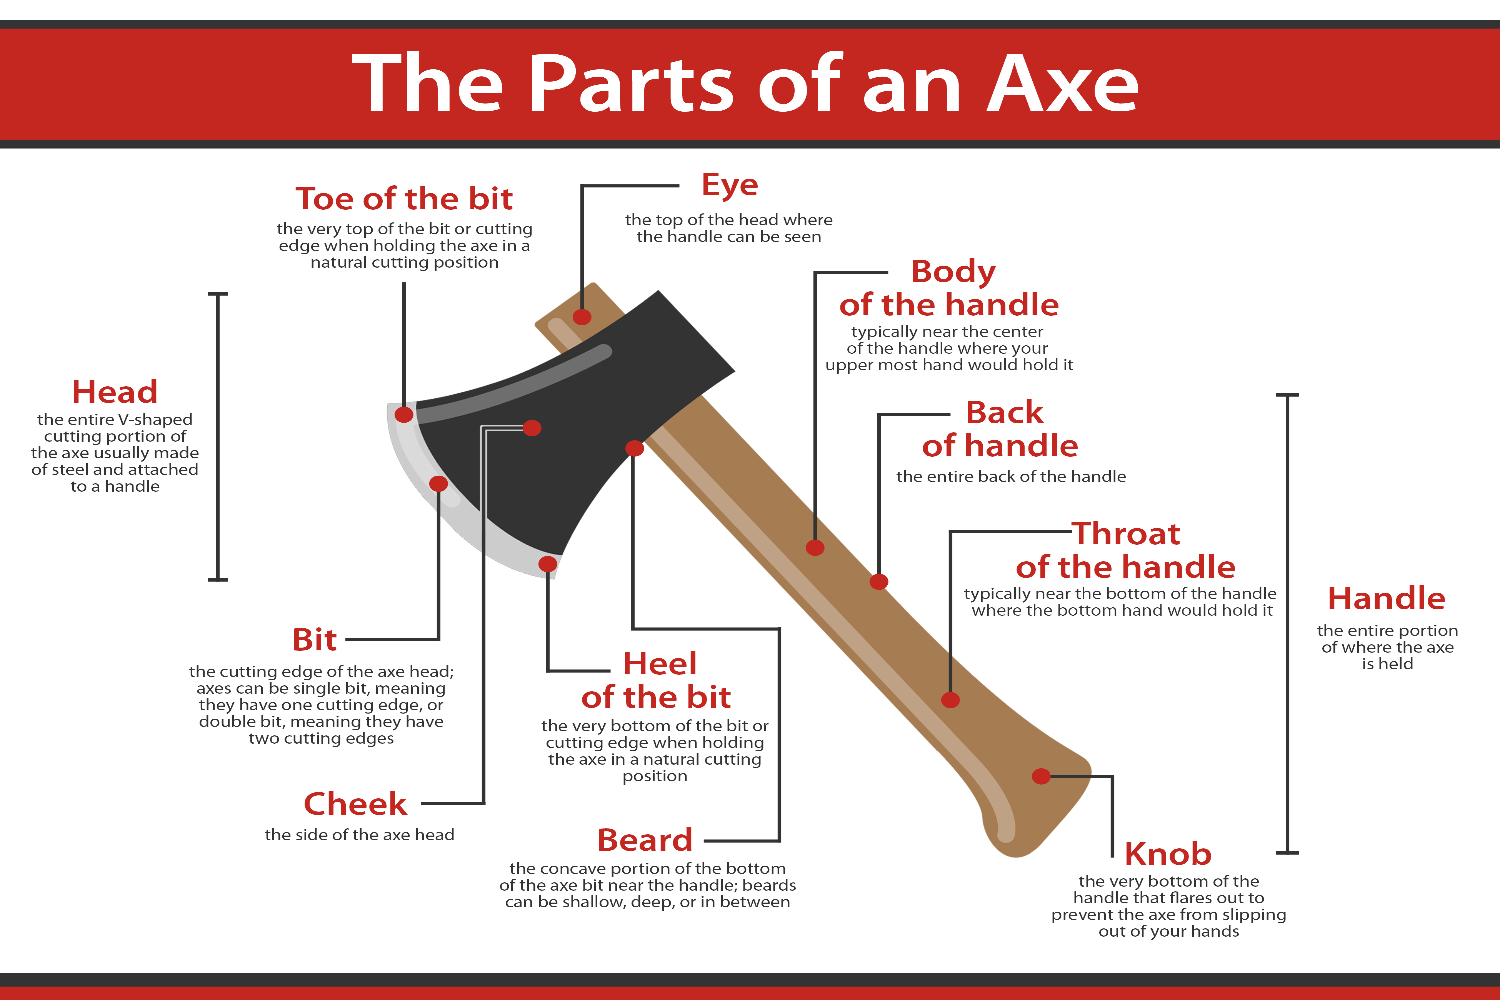 What are the Parts of an Axe?